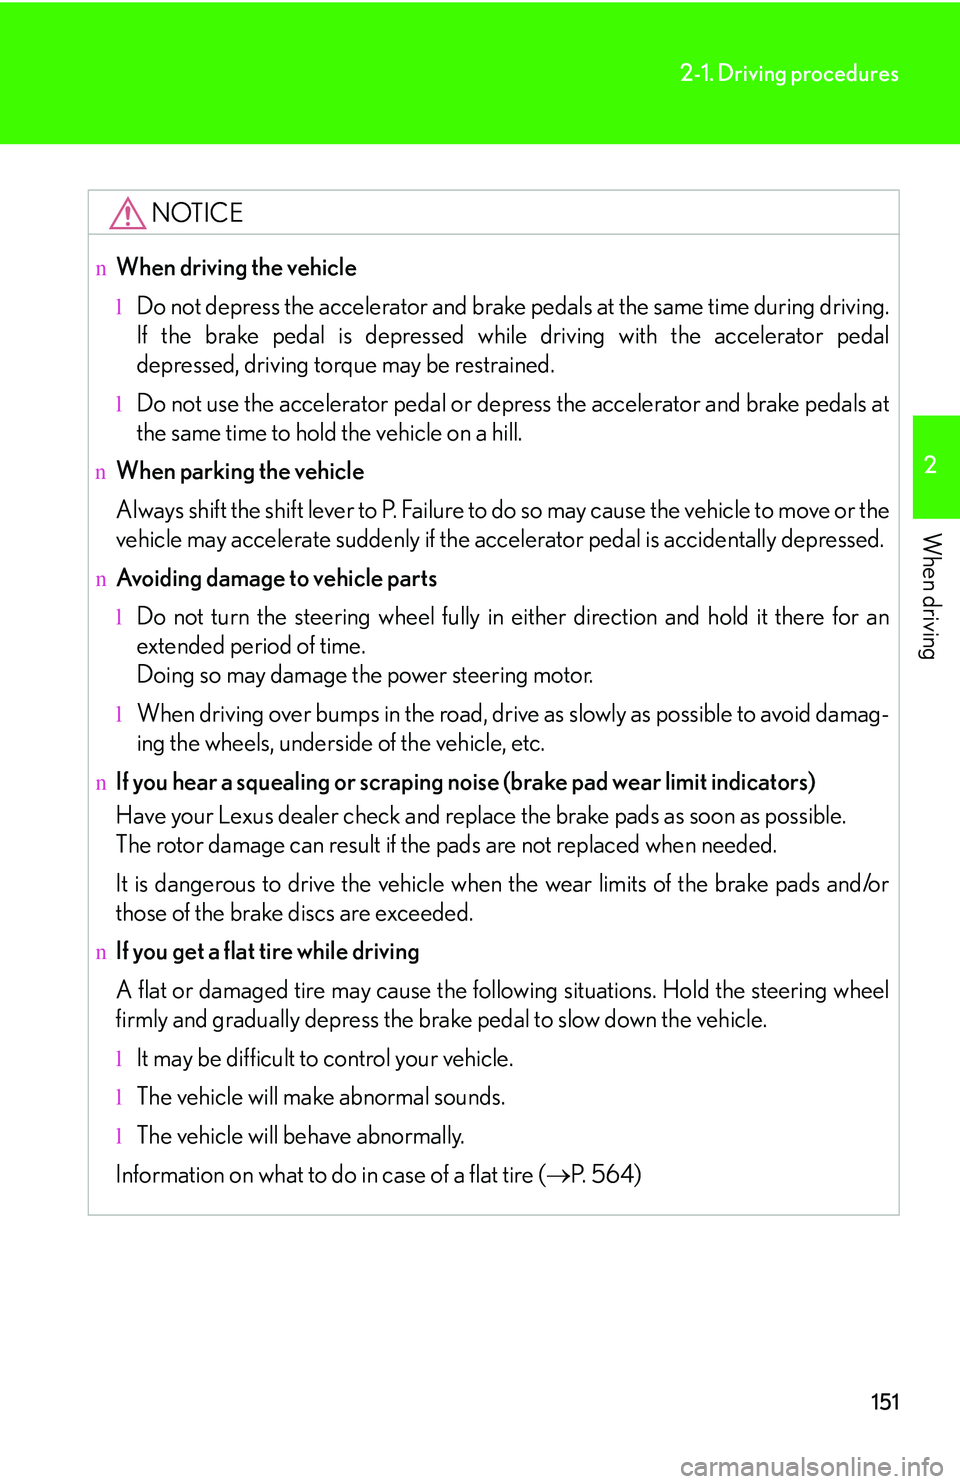 LEXUS RX350 2011  Owners Manual 151
2-1. Driving procedures
2

When driving
NOTICE
nWhen driving the vehicle
lDo not depress the accelerator and brake pedals at the same time during driving.
If the brake pedal is depressed while dri